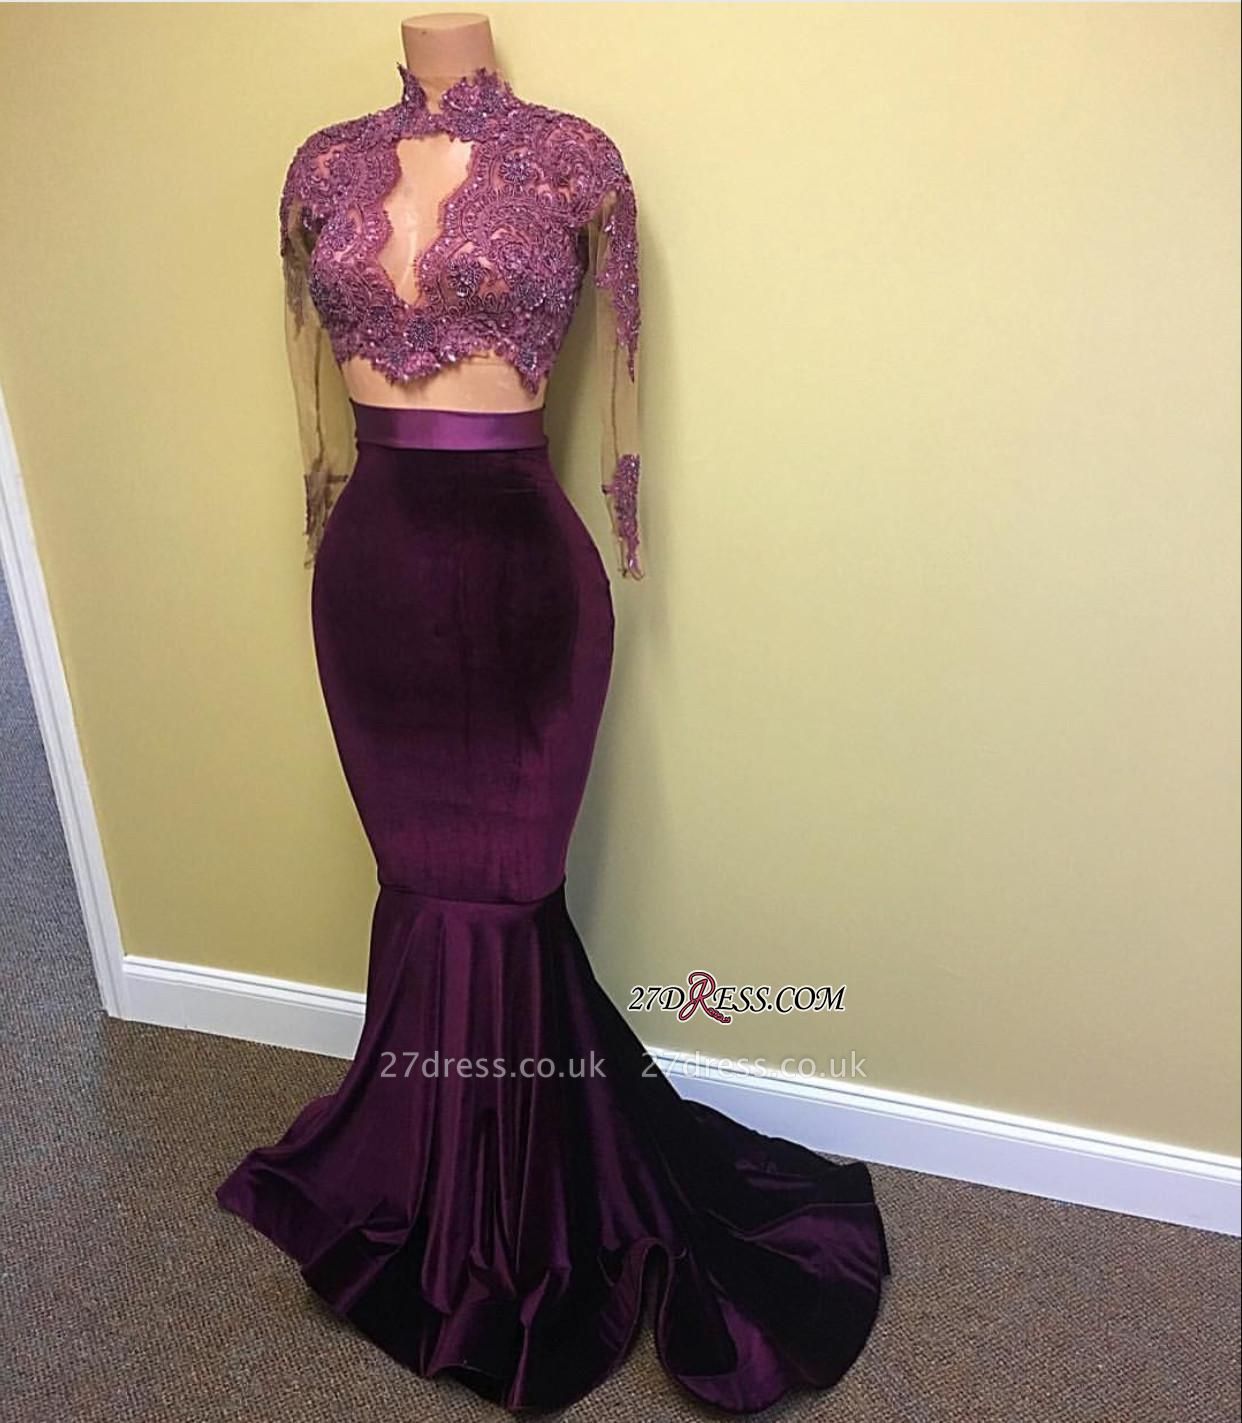 Mermaid Long-Sleeve High-Neck Lace-Appliques Modest Prom Dress UK CE0072